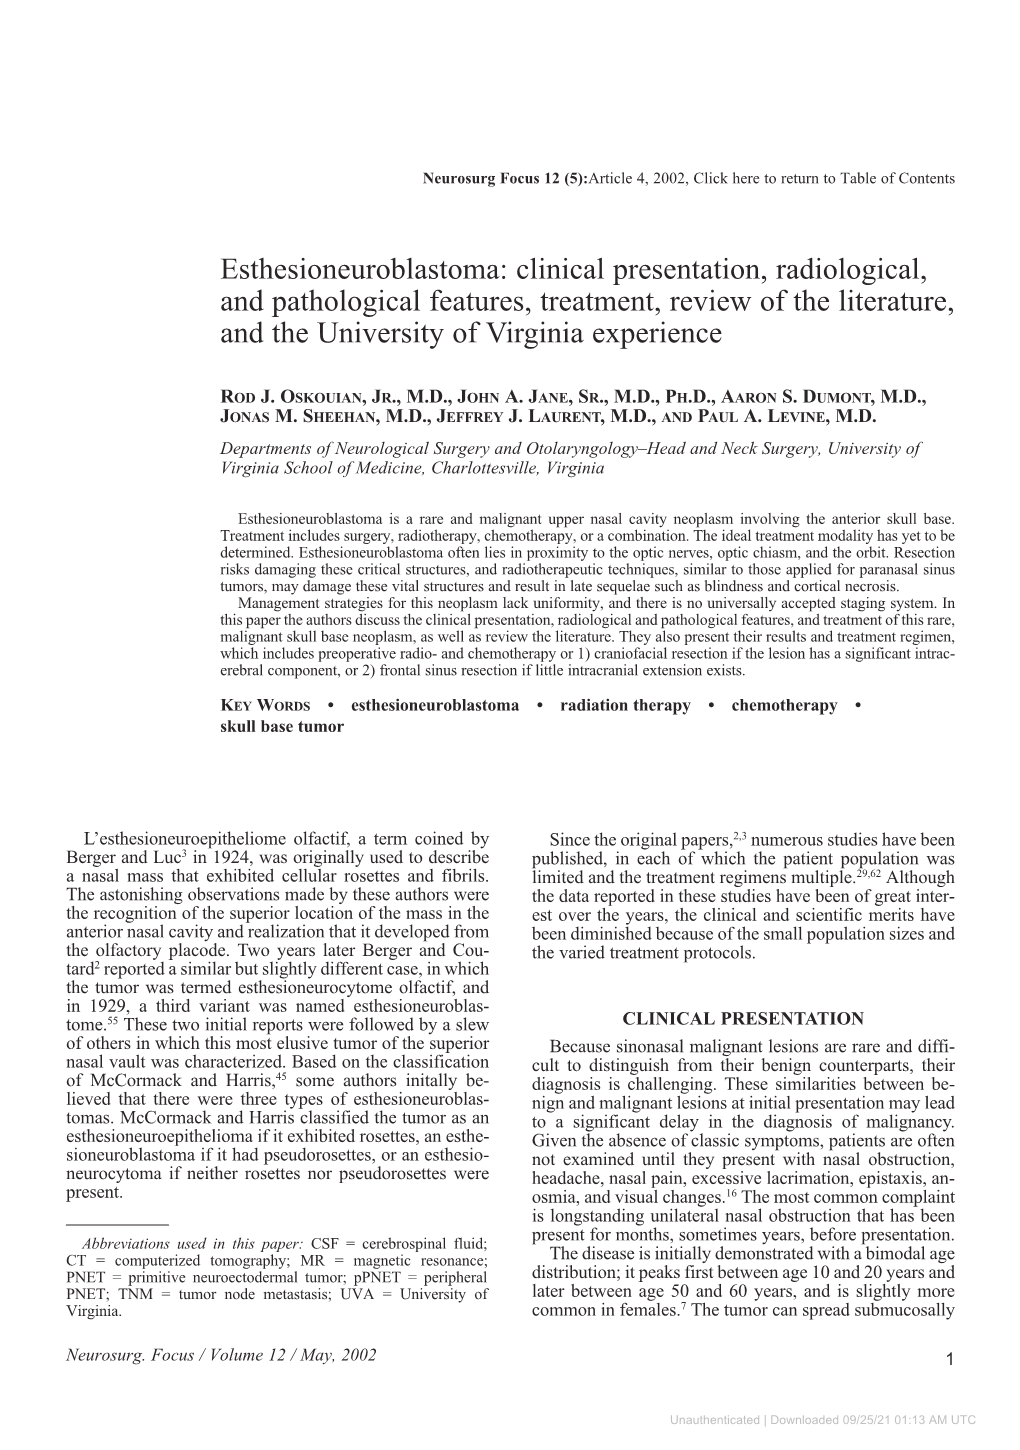 Esthesioneuroblastoma: Clinical Presentation, Radiological, and Pathological Features, Treatment, Review of the Literature, and the University of Virginia Experience